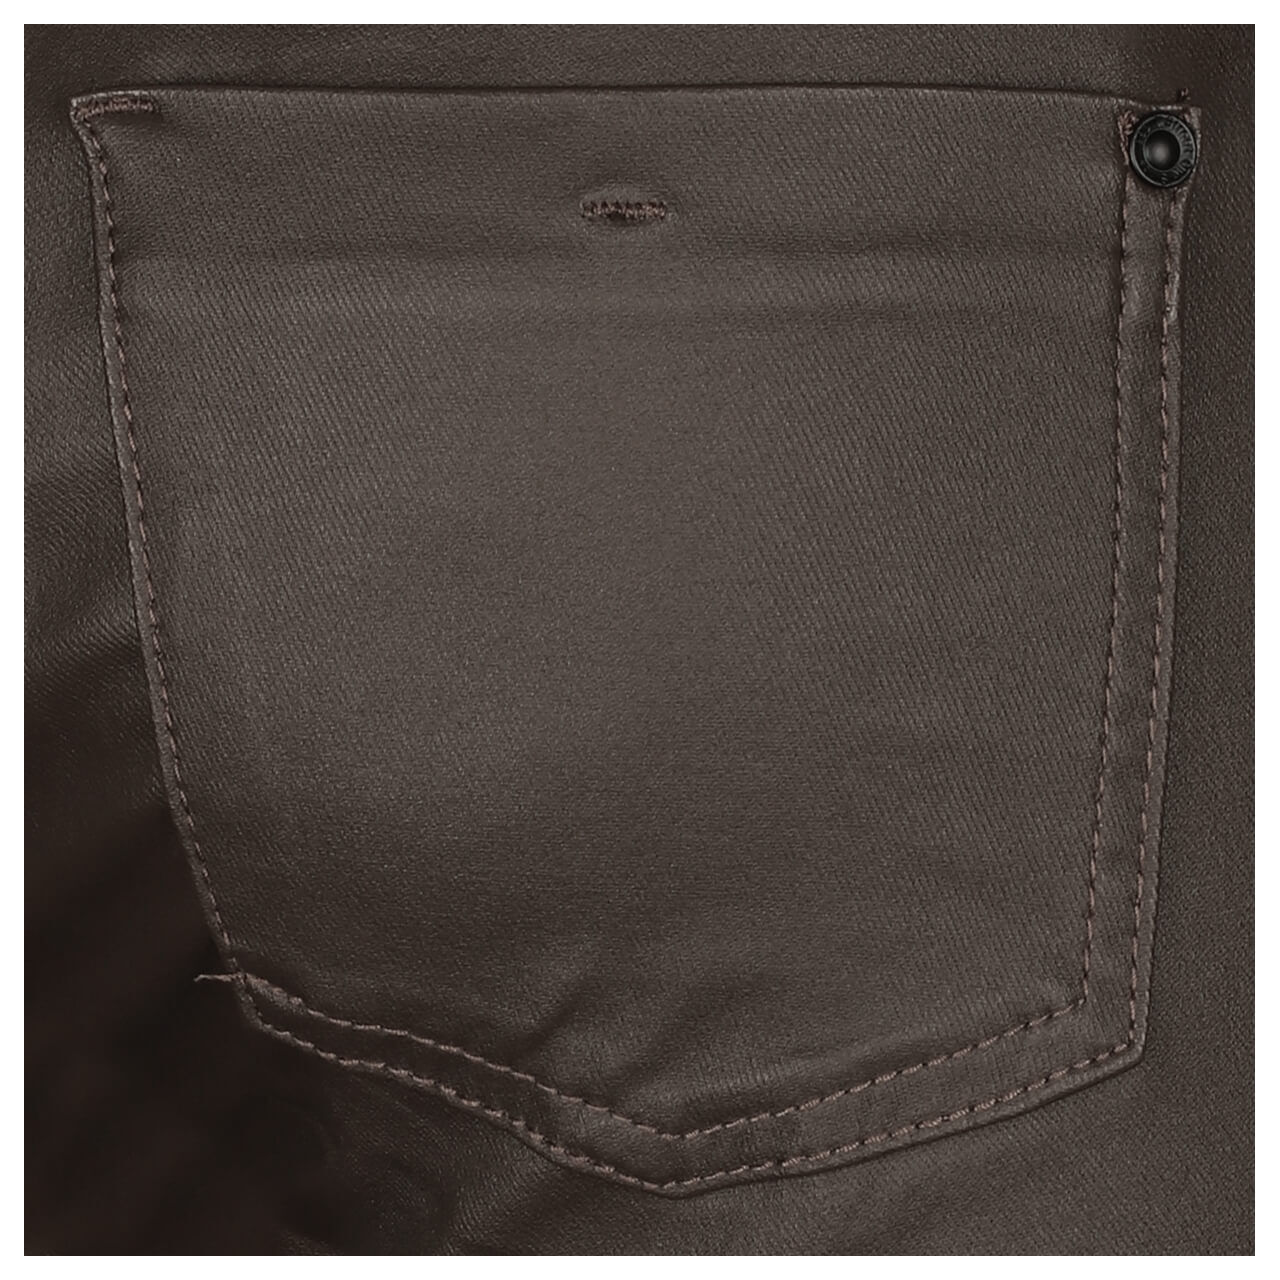 Street One York Jeans brown coated